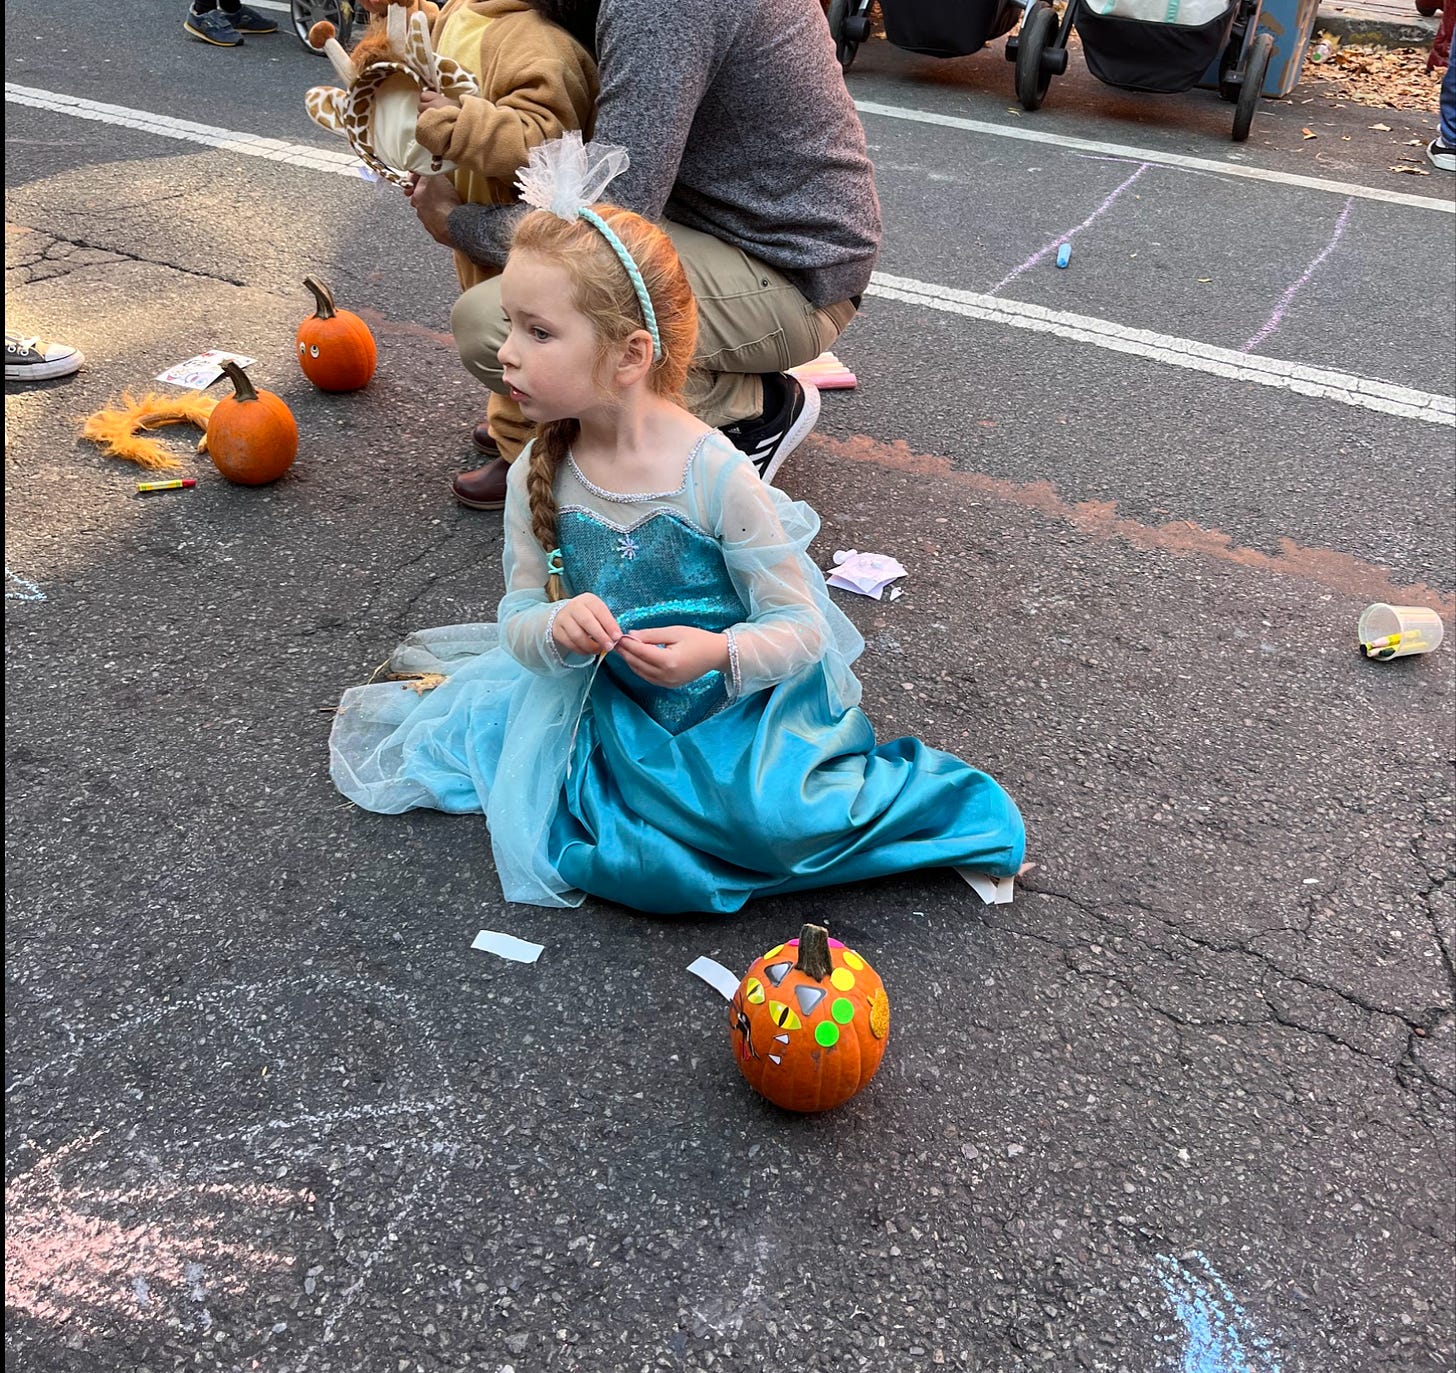 M, who is five years old, sitting in the middle of the street, wearing an Elsa costume and putting stickers on a small pumpkin.